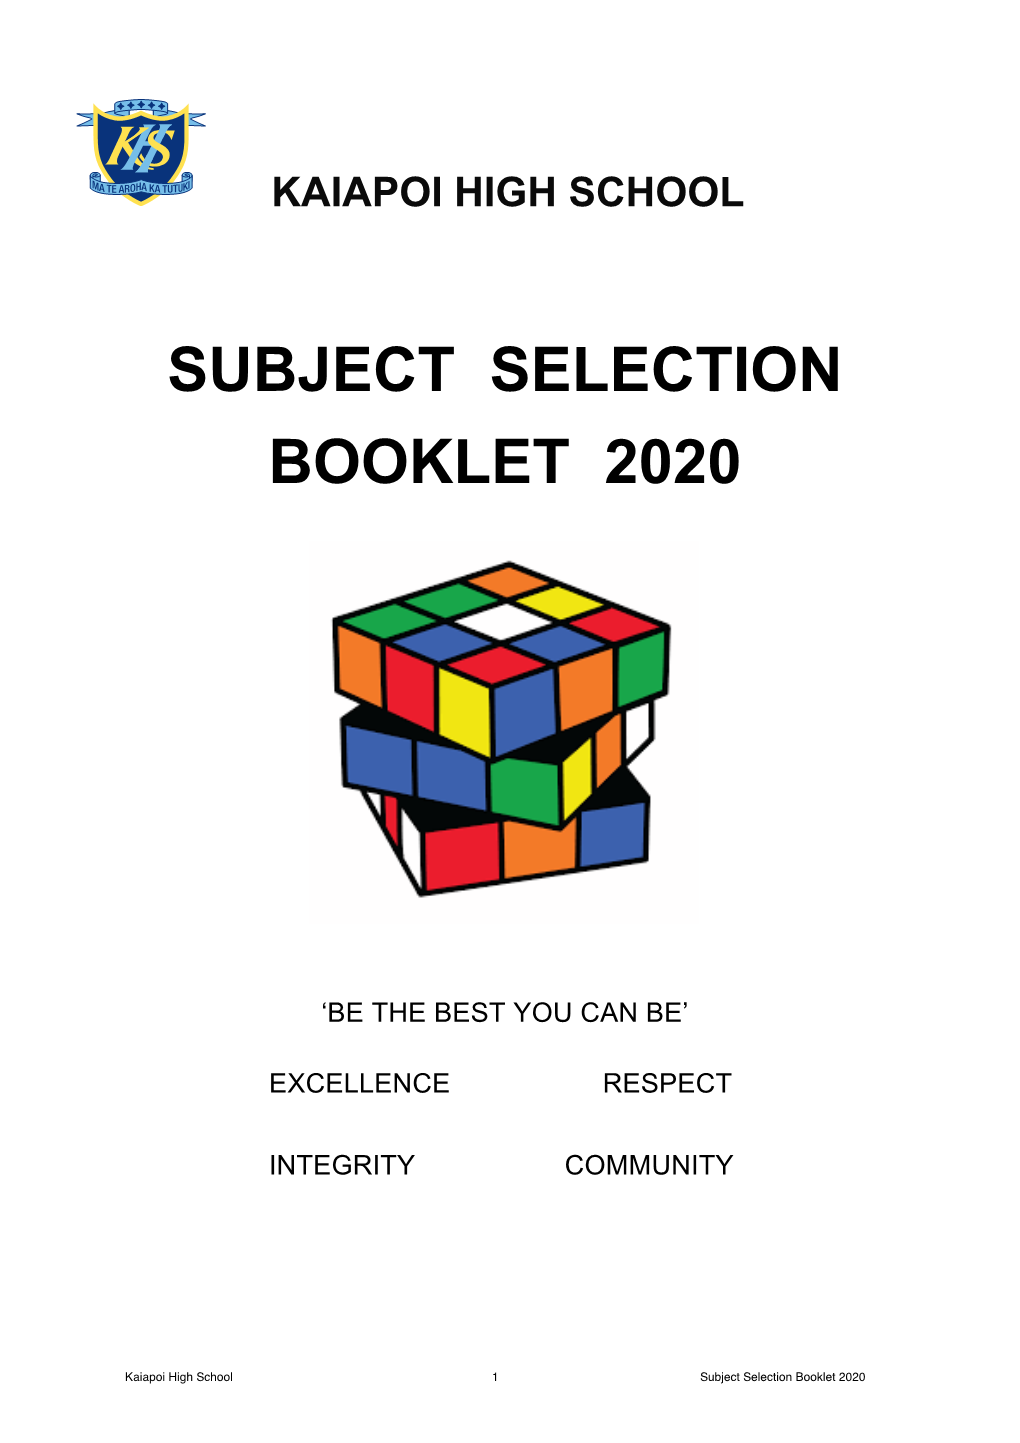 Subject Selection Booklet 2020